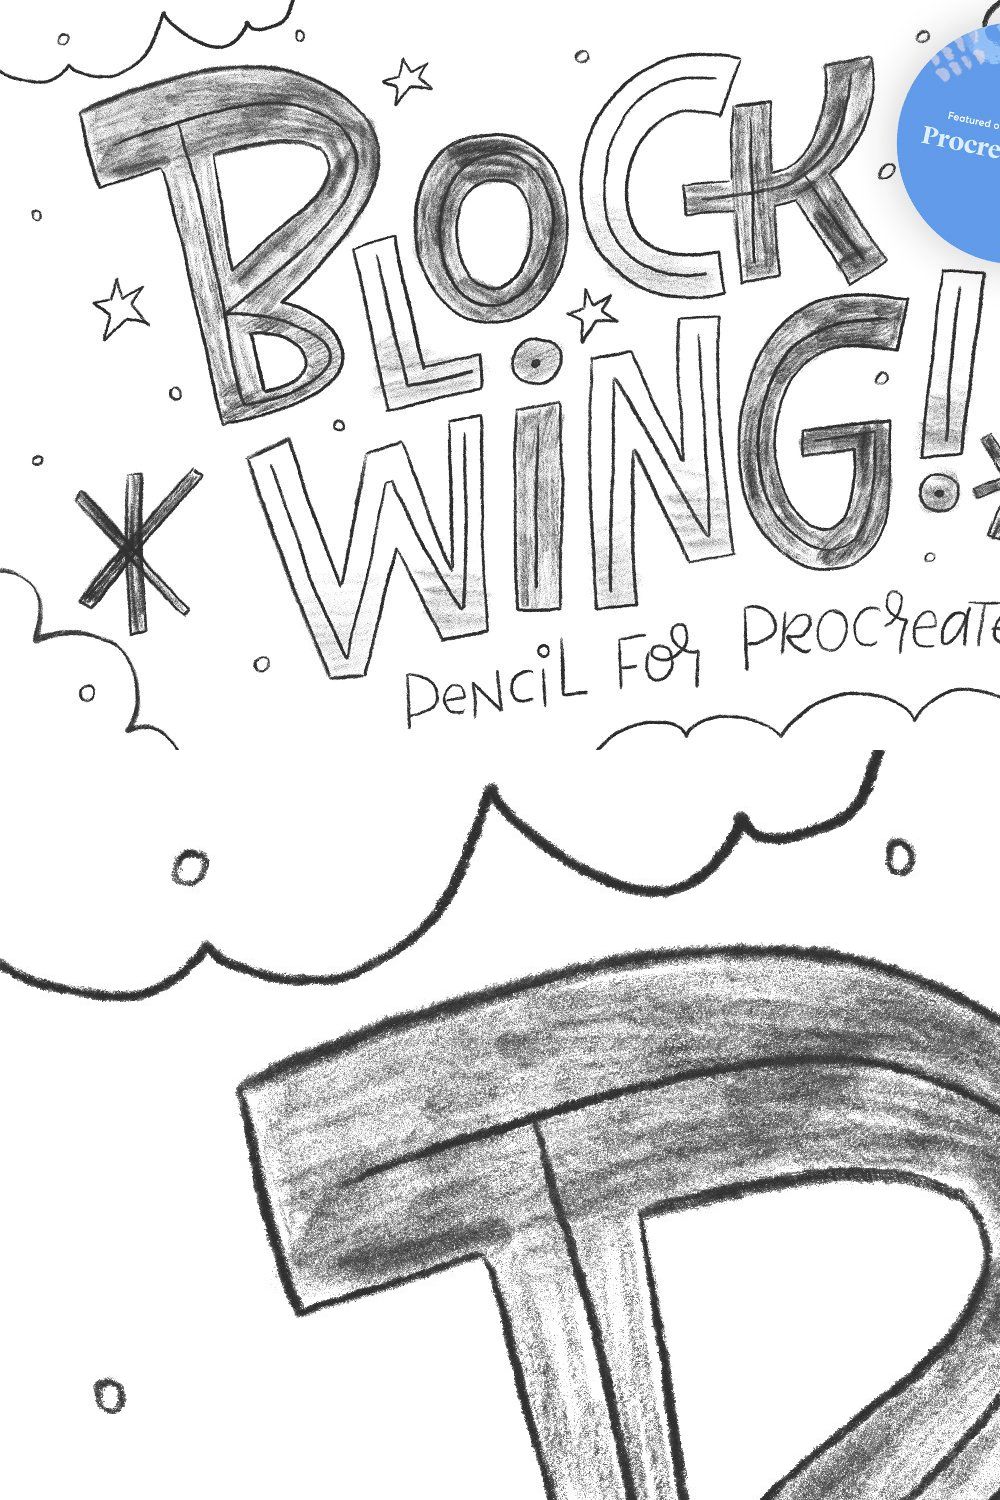 Blockwing Procreate Pencil Brushes pinterest preview image.